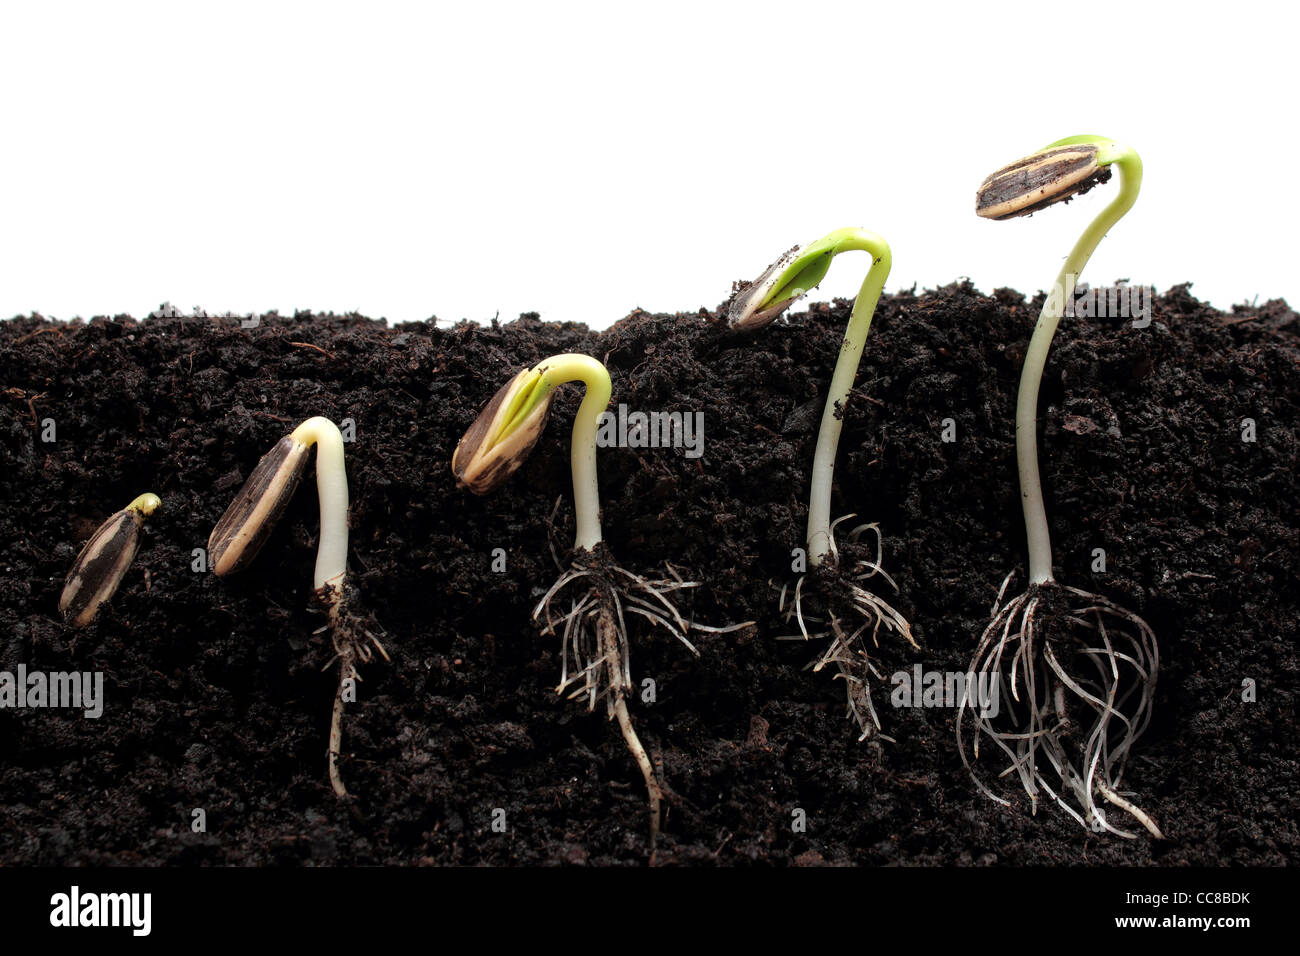 Sunflower plant sprouts germinating in soil Stock Photo